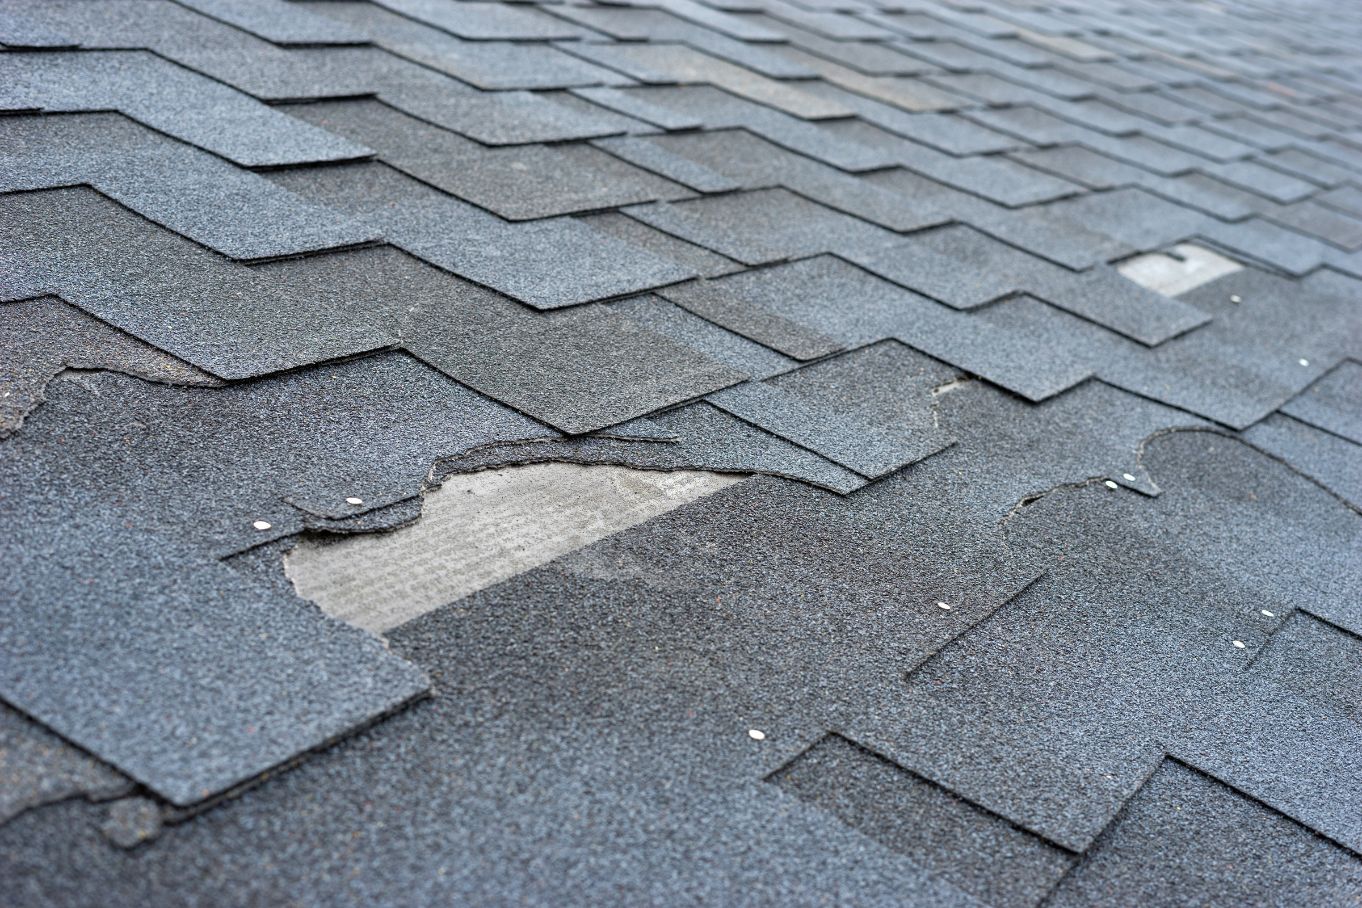 Roof Maintenance Tips Homeowners Should Know